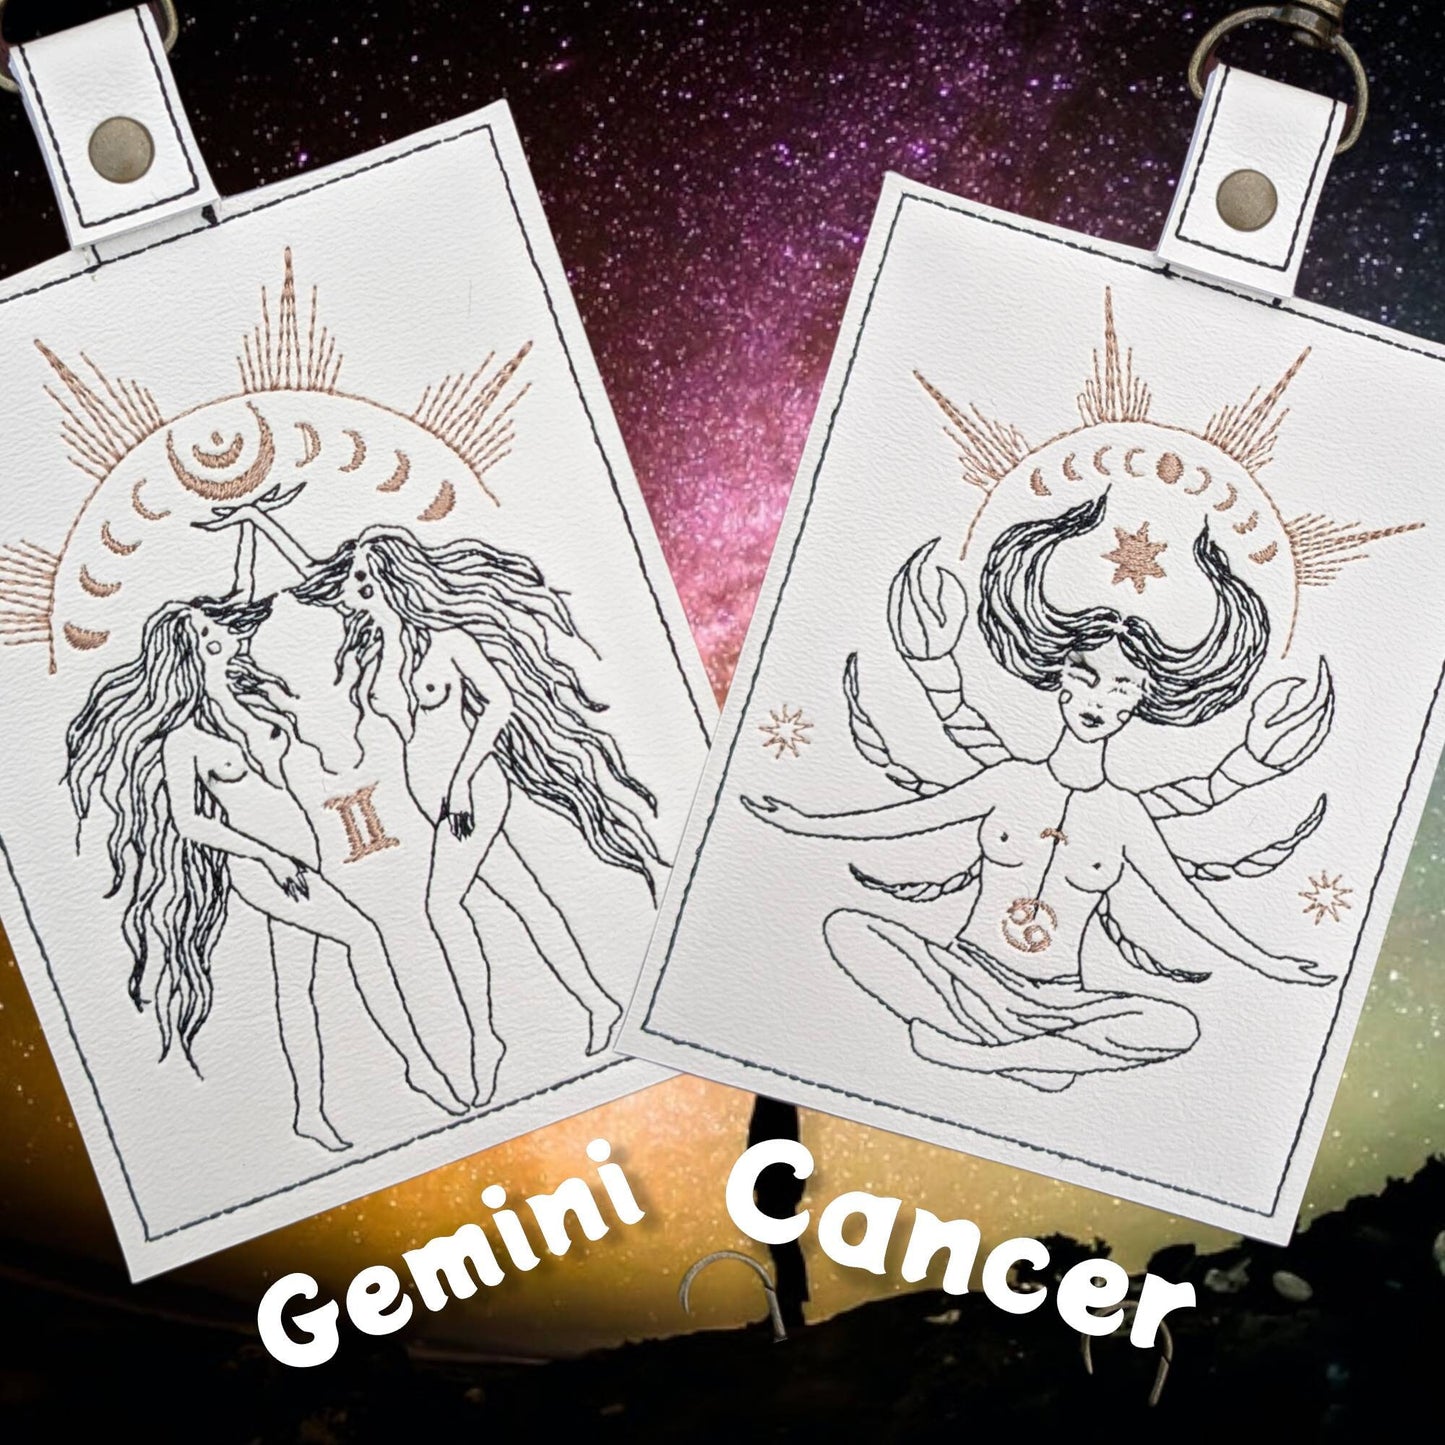 Celestial zodiac vaccination card protector. Attach to purse, bag, backback or beltloops Vinyl, cork, leather.